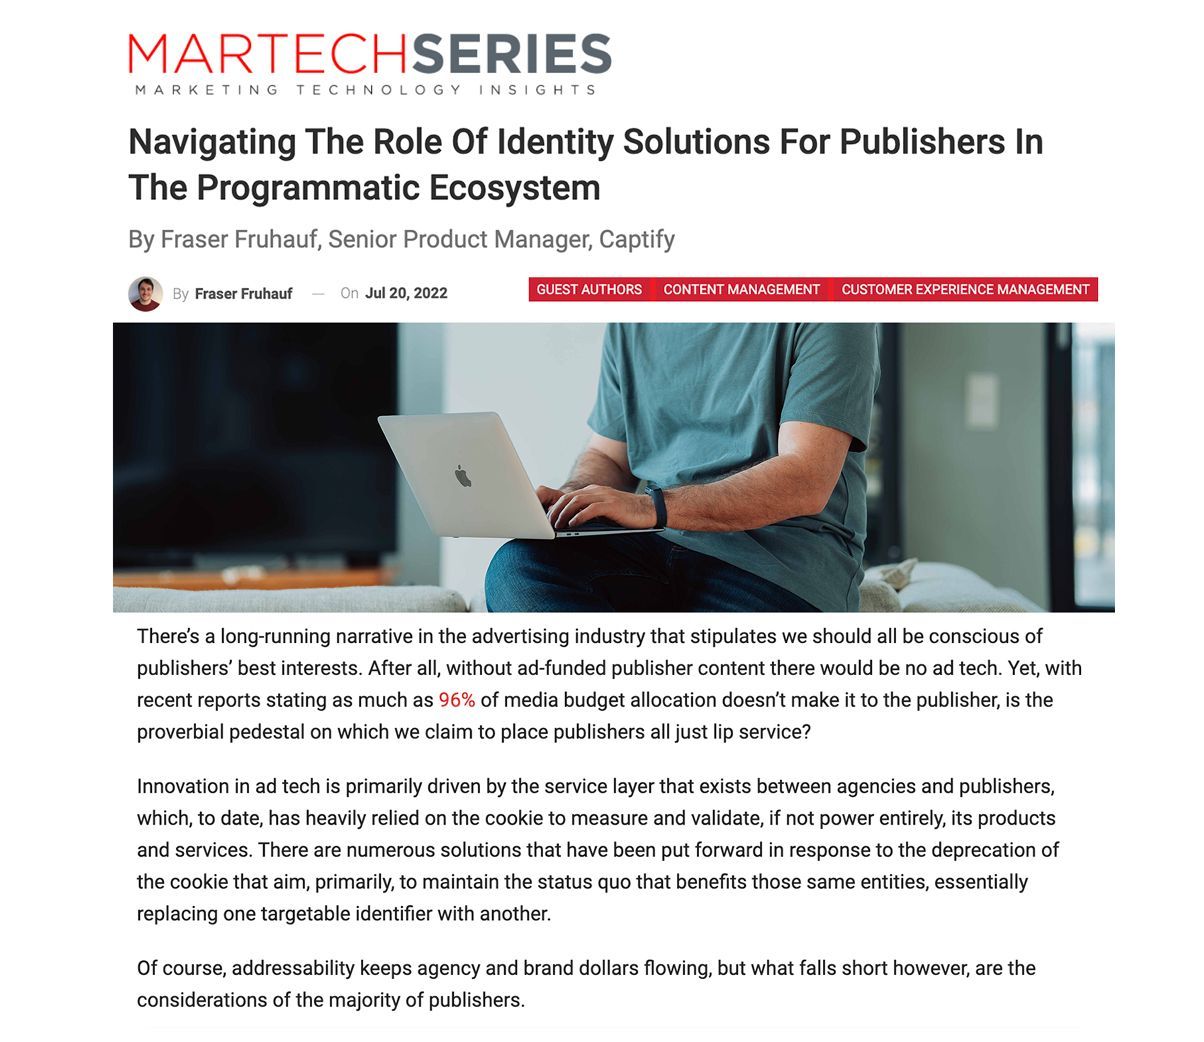 MarTech Series: Navigating The Role Of Identity Solutions For Publishers In The Programmatic Ecosystem